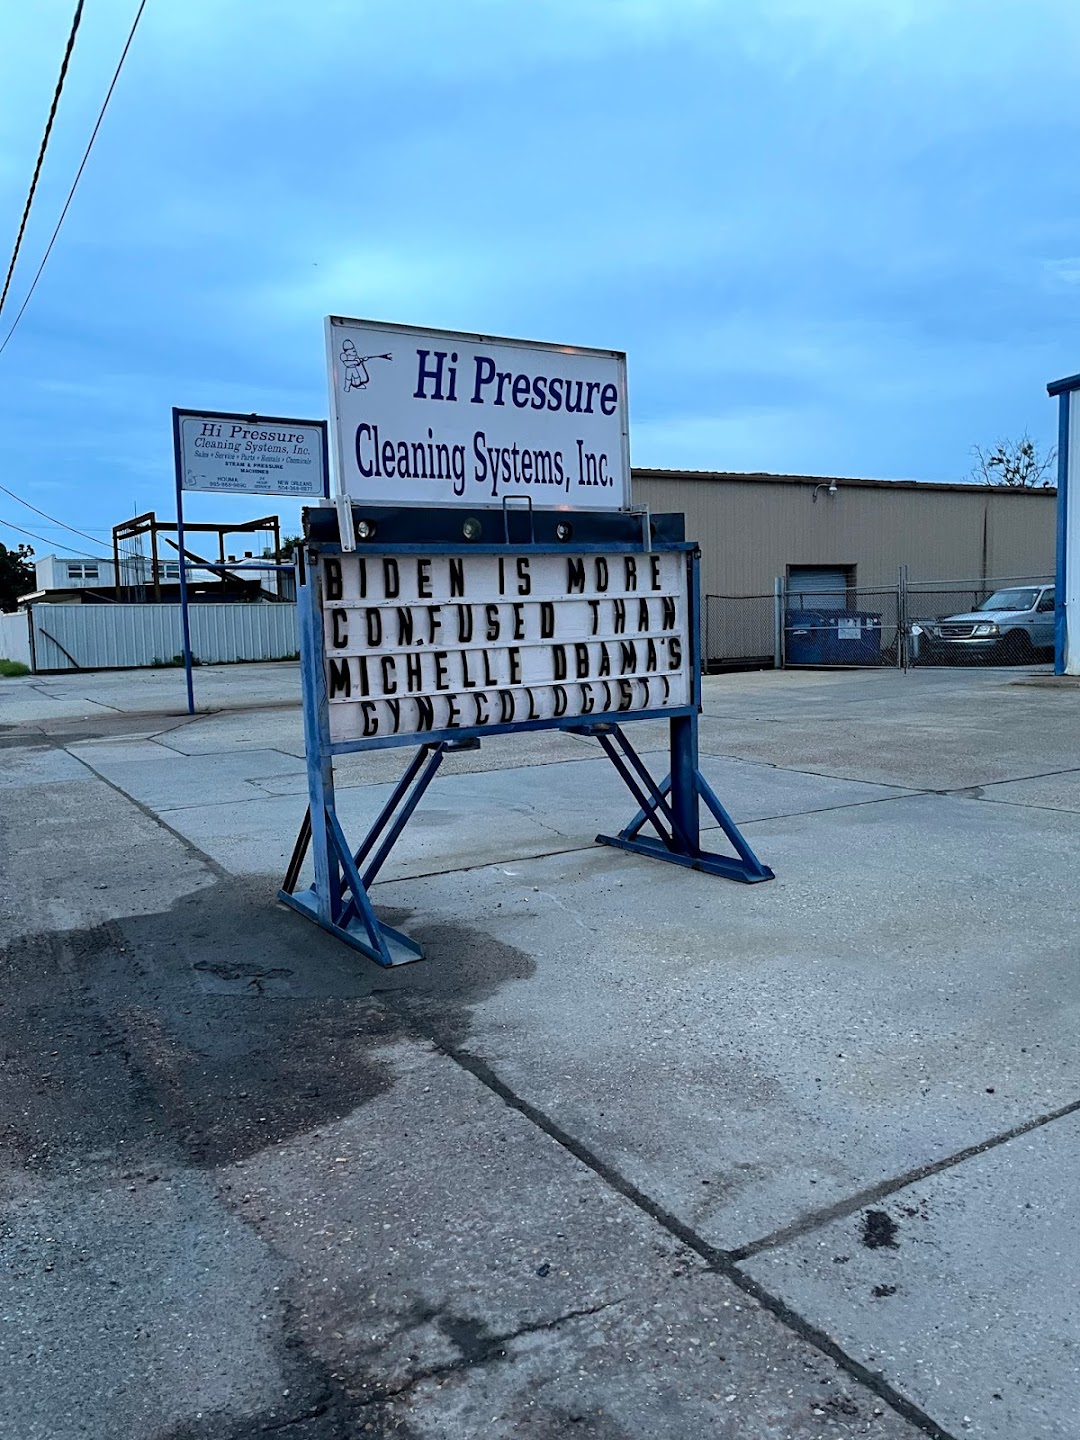 Hi Pressure Cleaning Systems, Inc